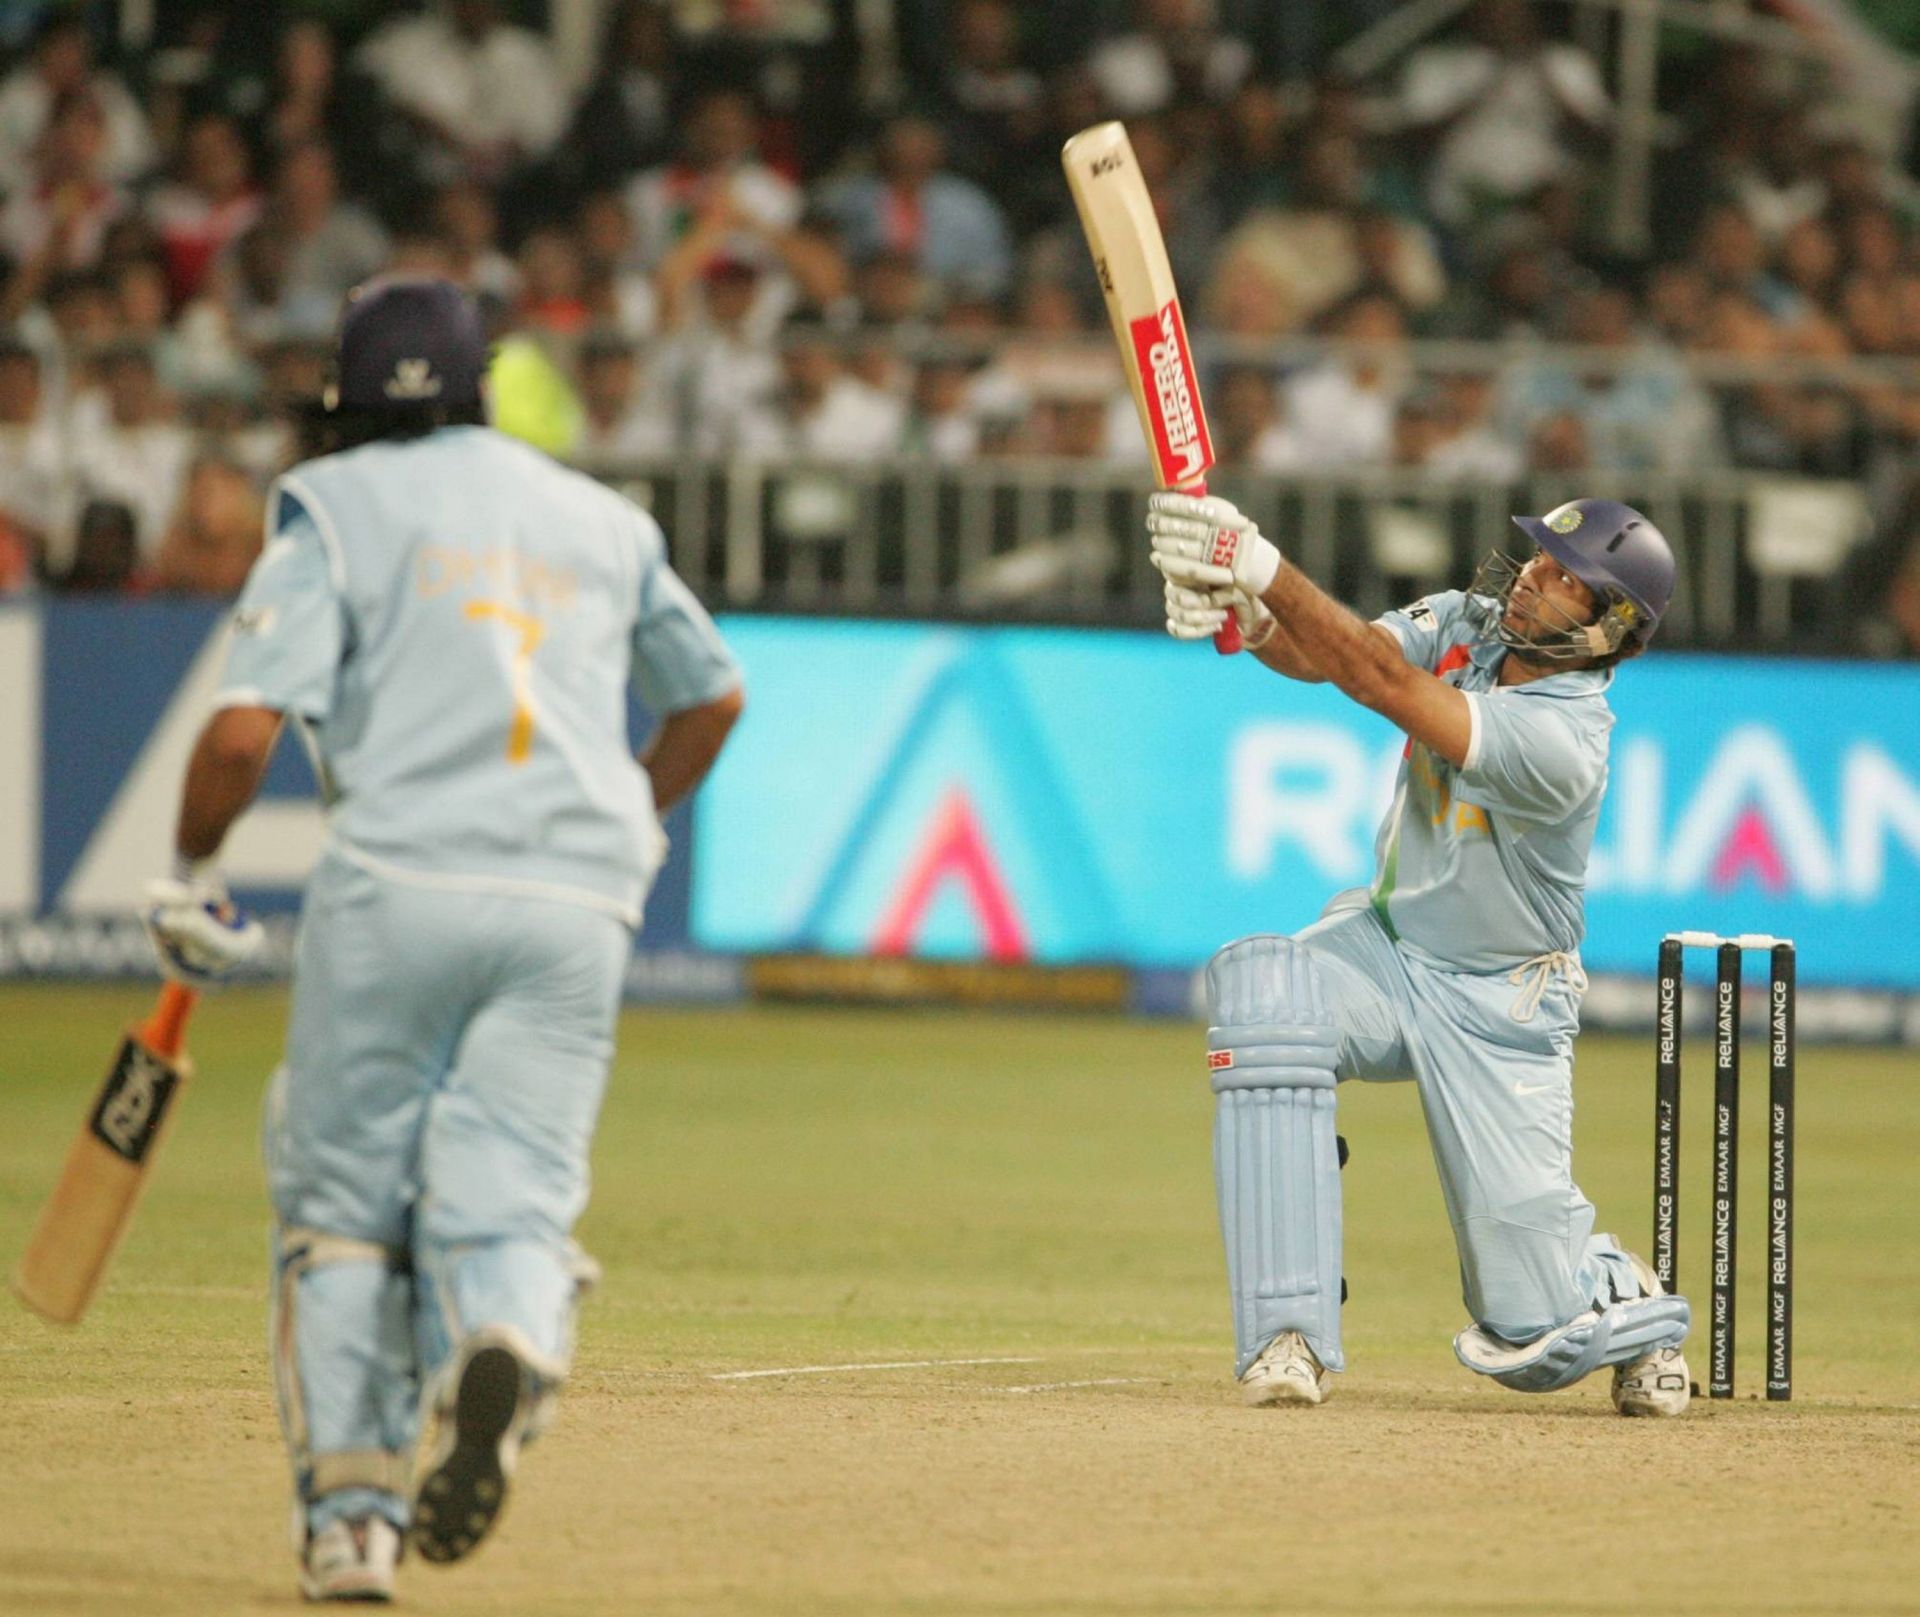 Yuvraj Singh hammers Stuart Broad for one of his six sixes. (Pic: Getty Images)